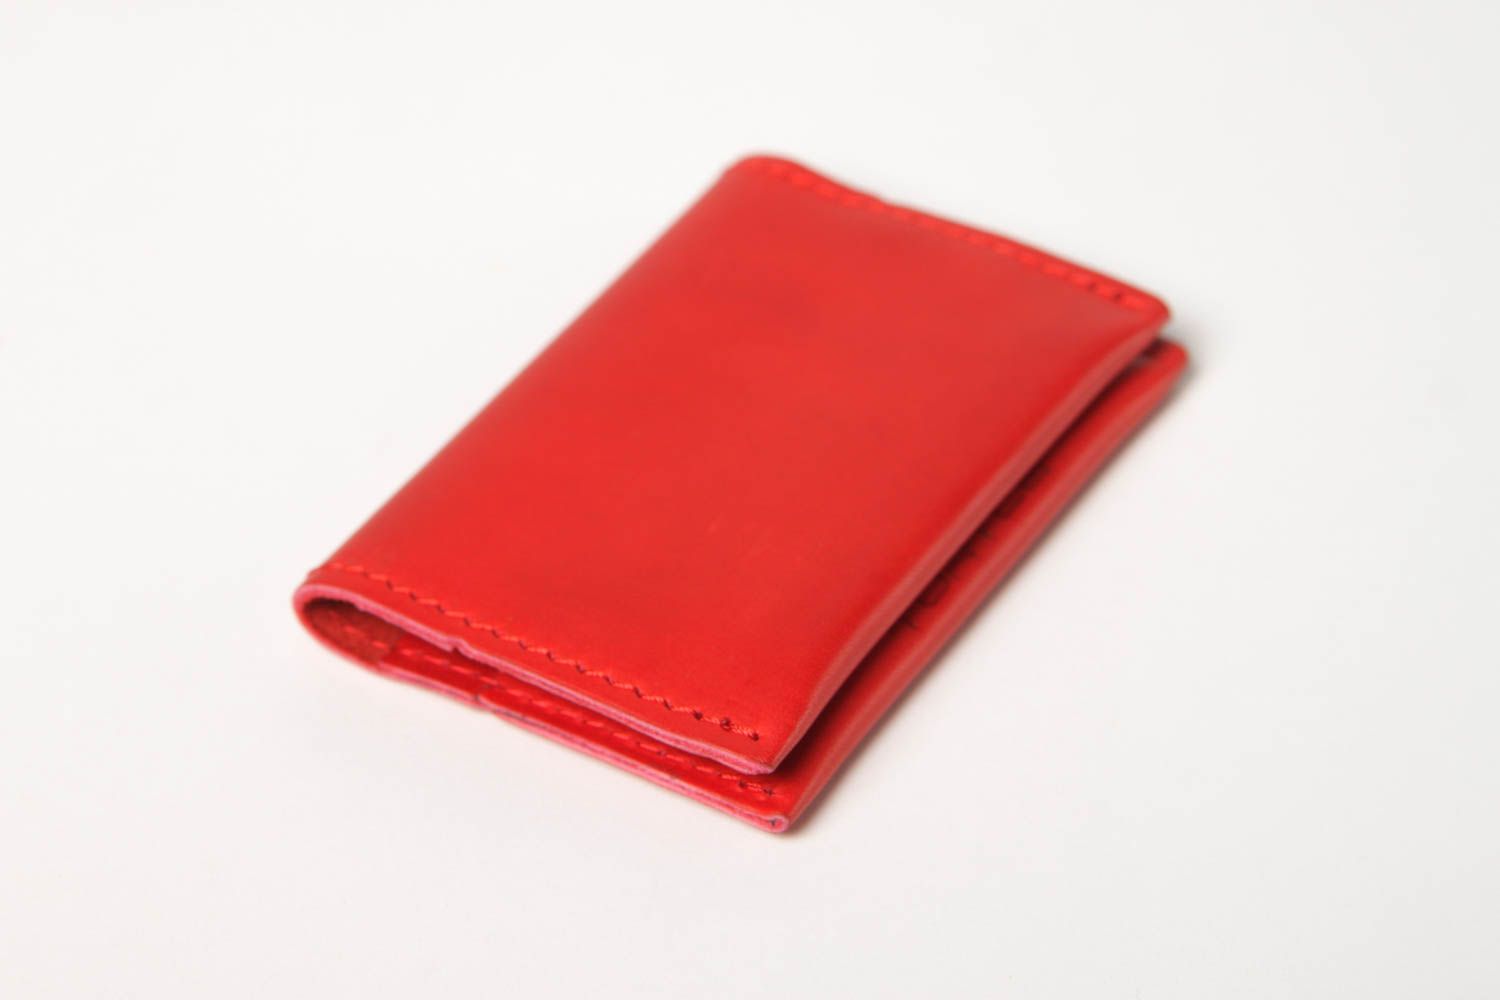 Beautiful handmade leather card holder leather goods business gift ideas photo 2